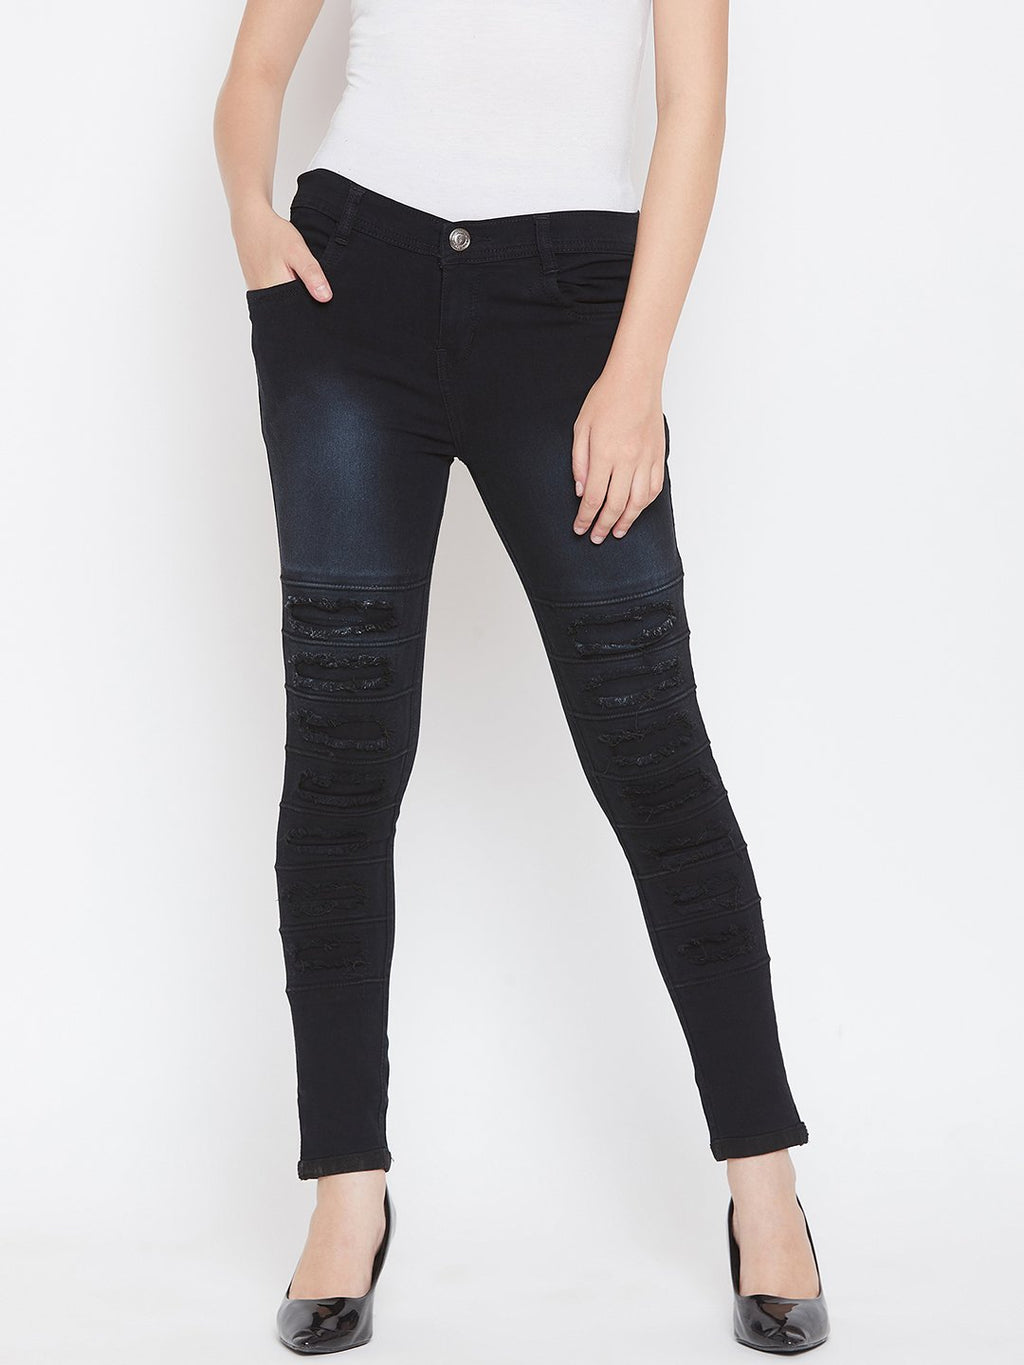 Distressed Stretchable Black Jeans - NiftyJeans